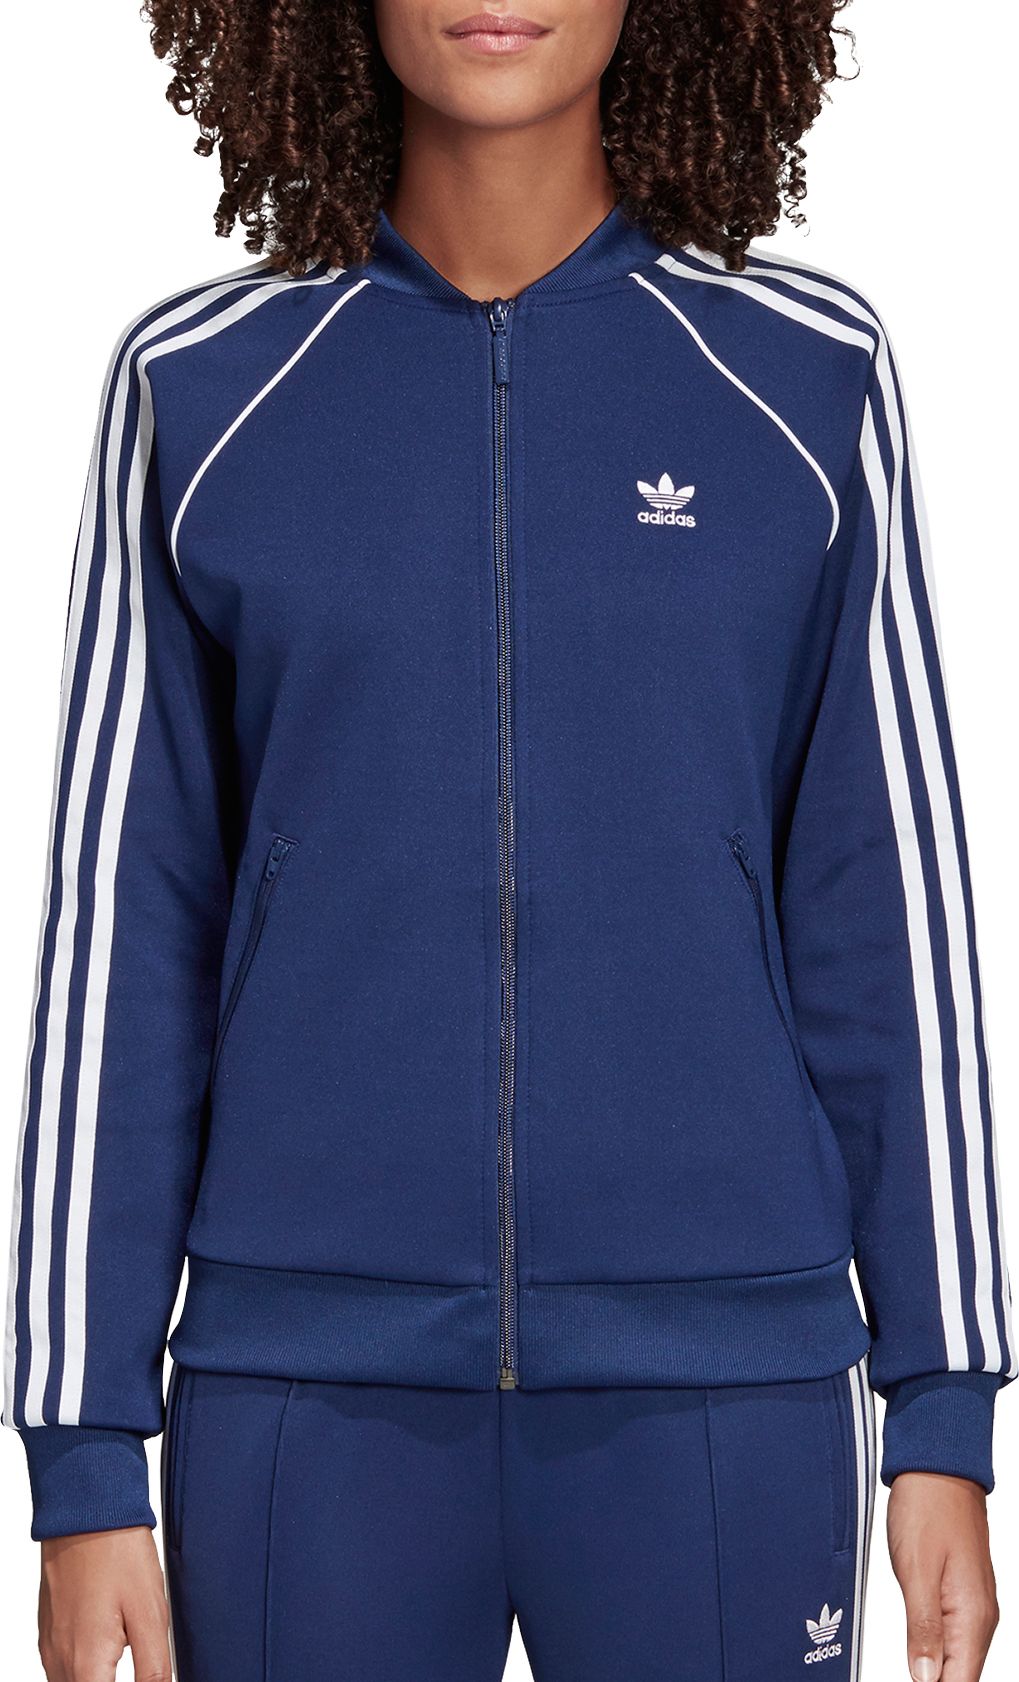 blue adidas outfit women's